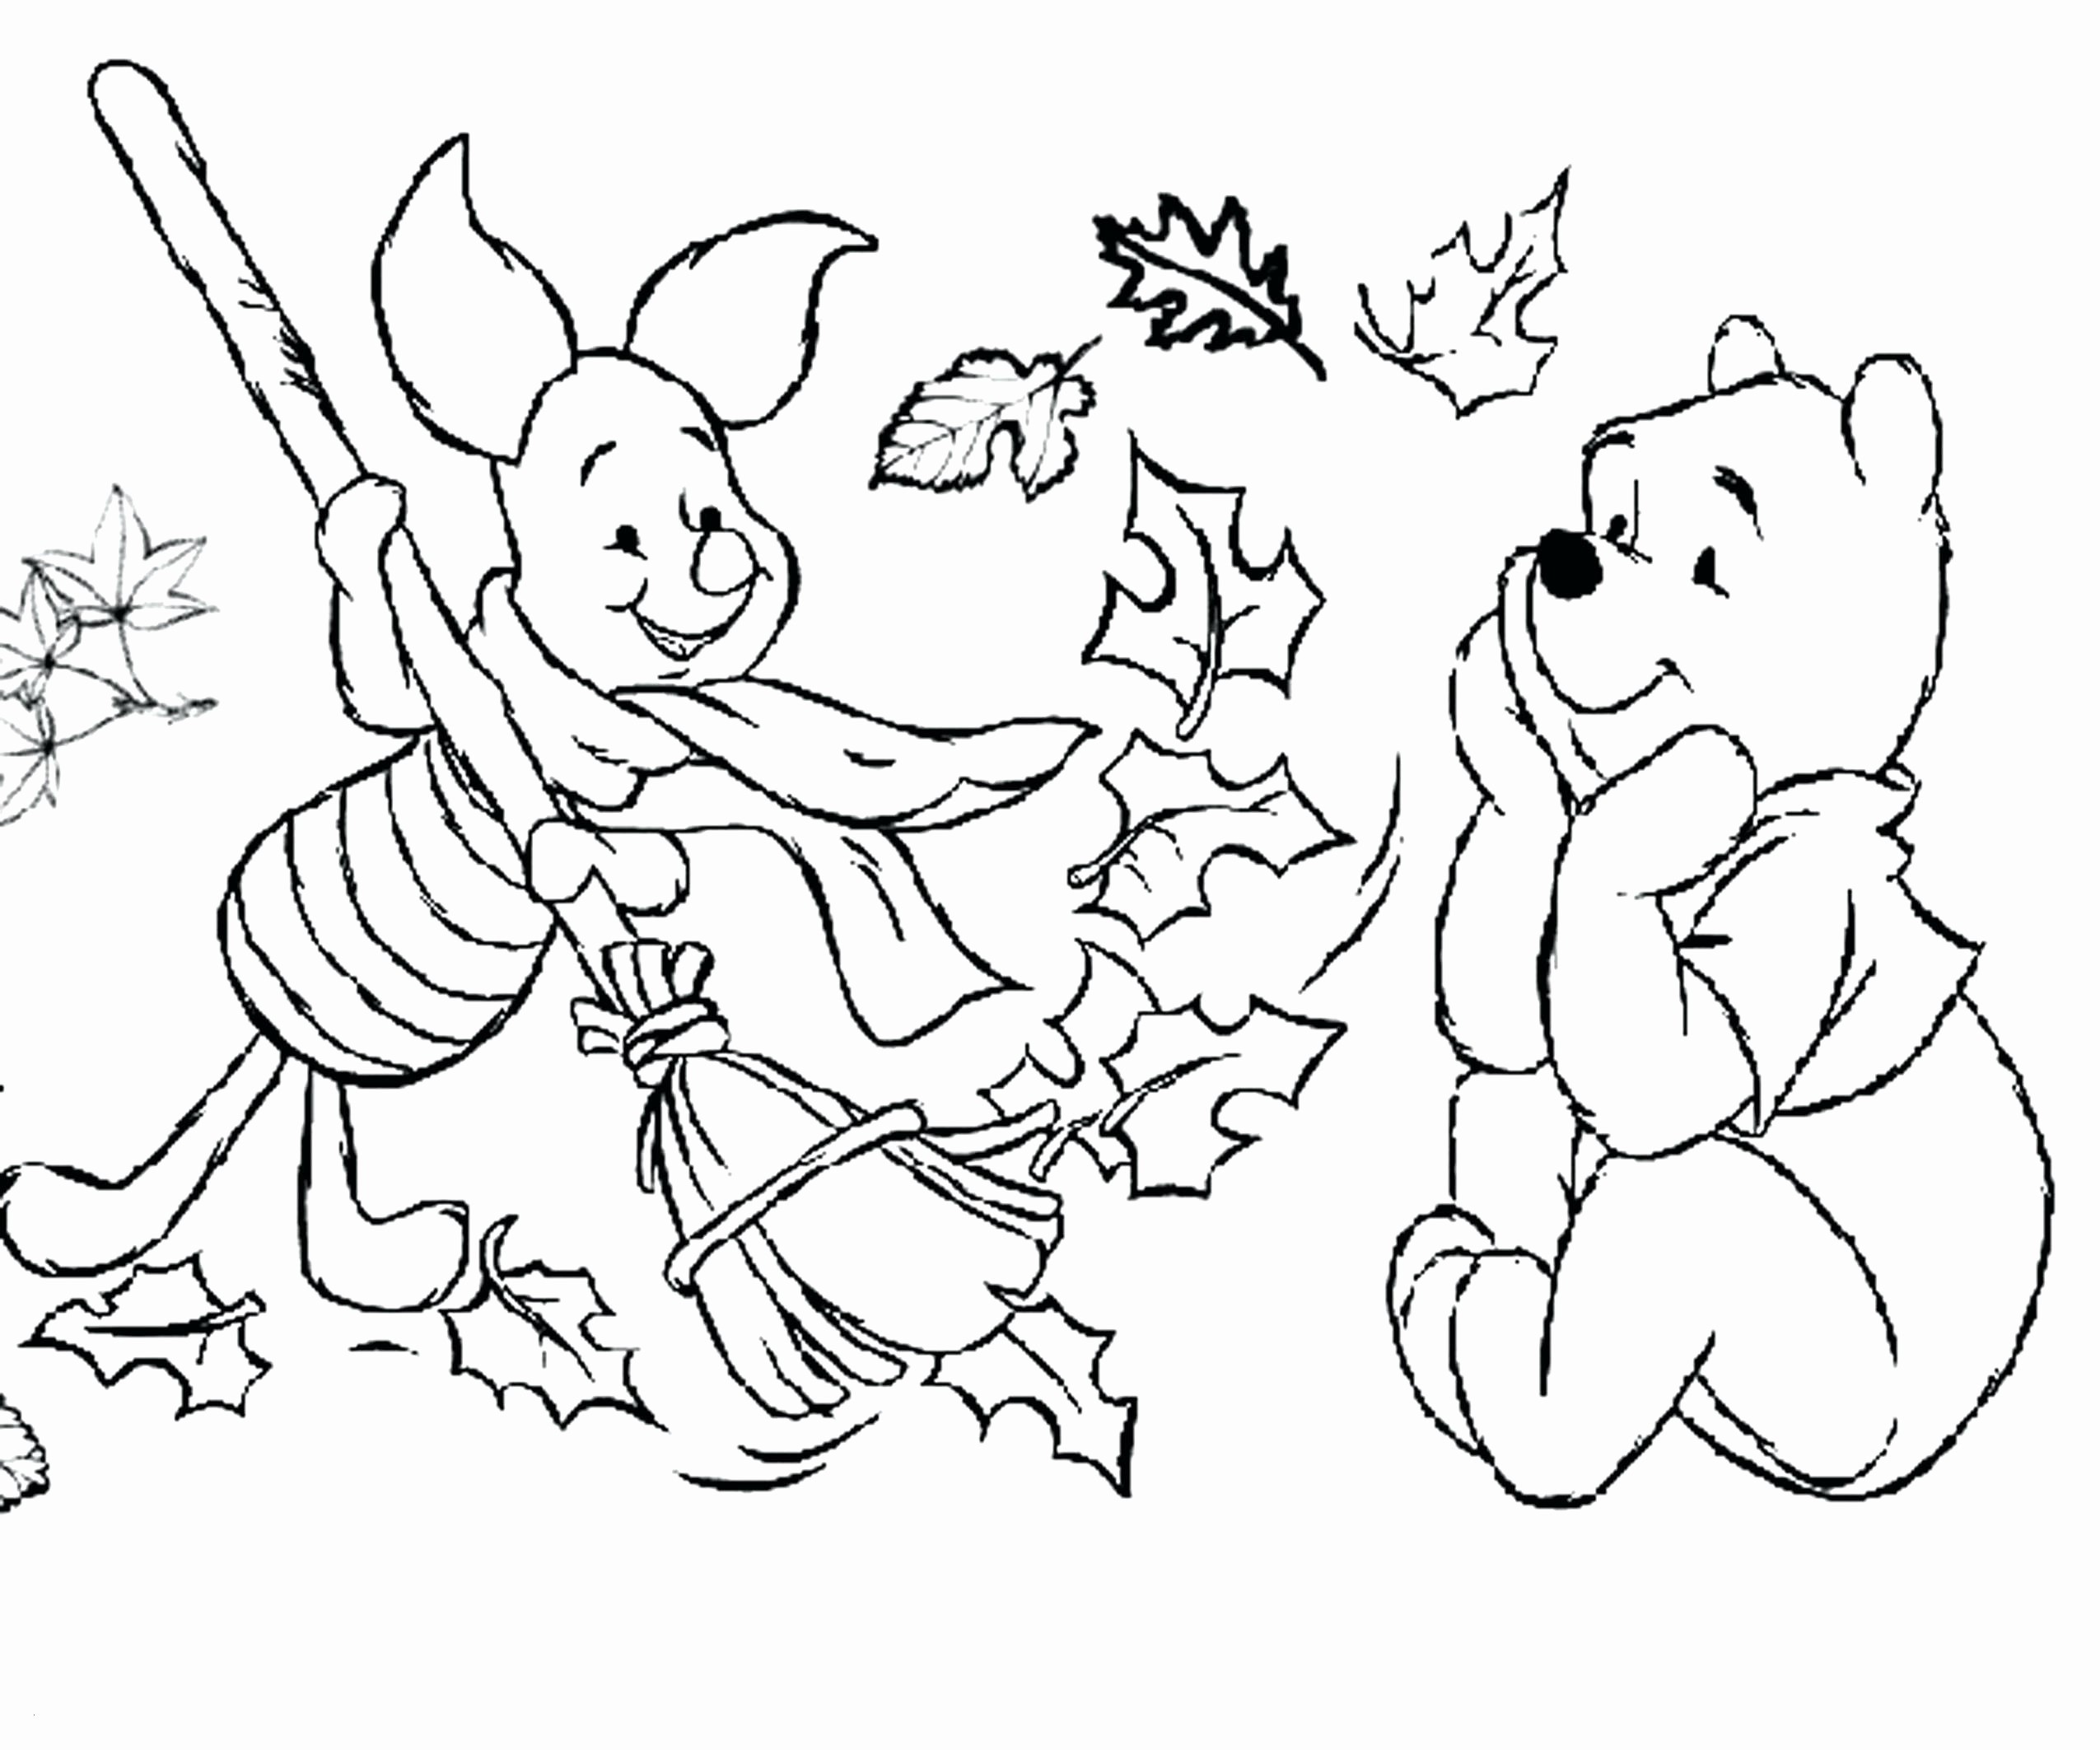 Free Coloring Pages For Kids Printable Coloring Pages For Fall Printable With Free And 30aa 0d